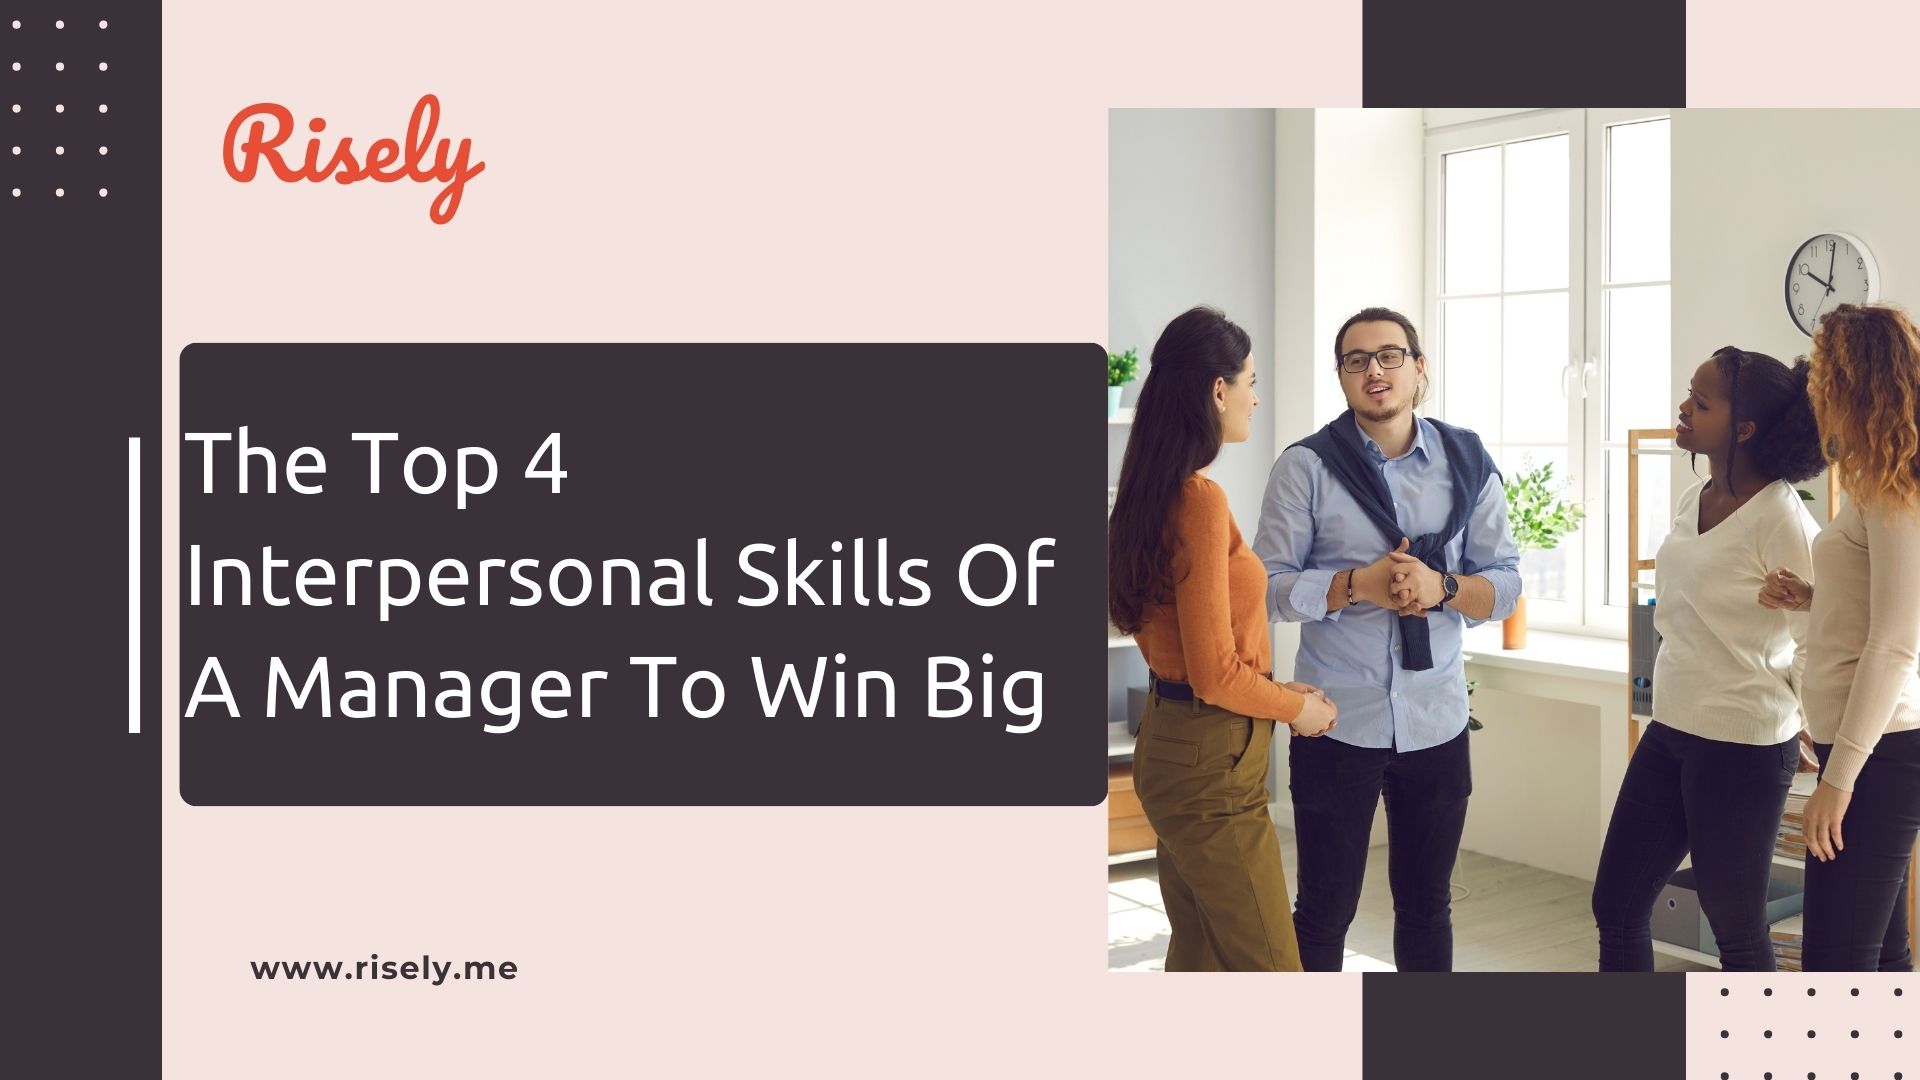 The Top 4 Interpersonal Skills Of A Manager To Win Big